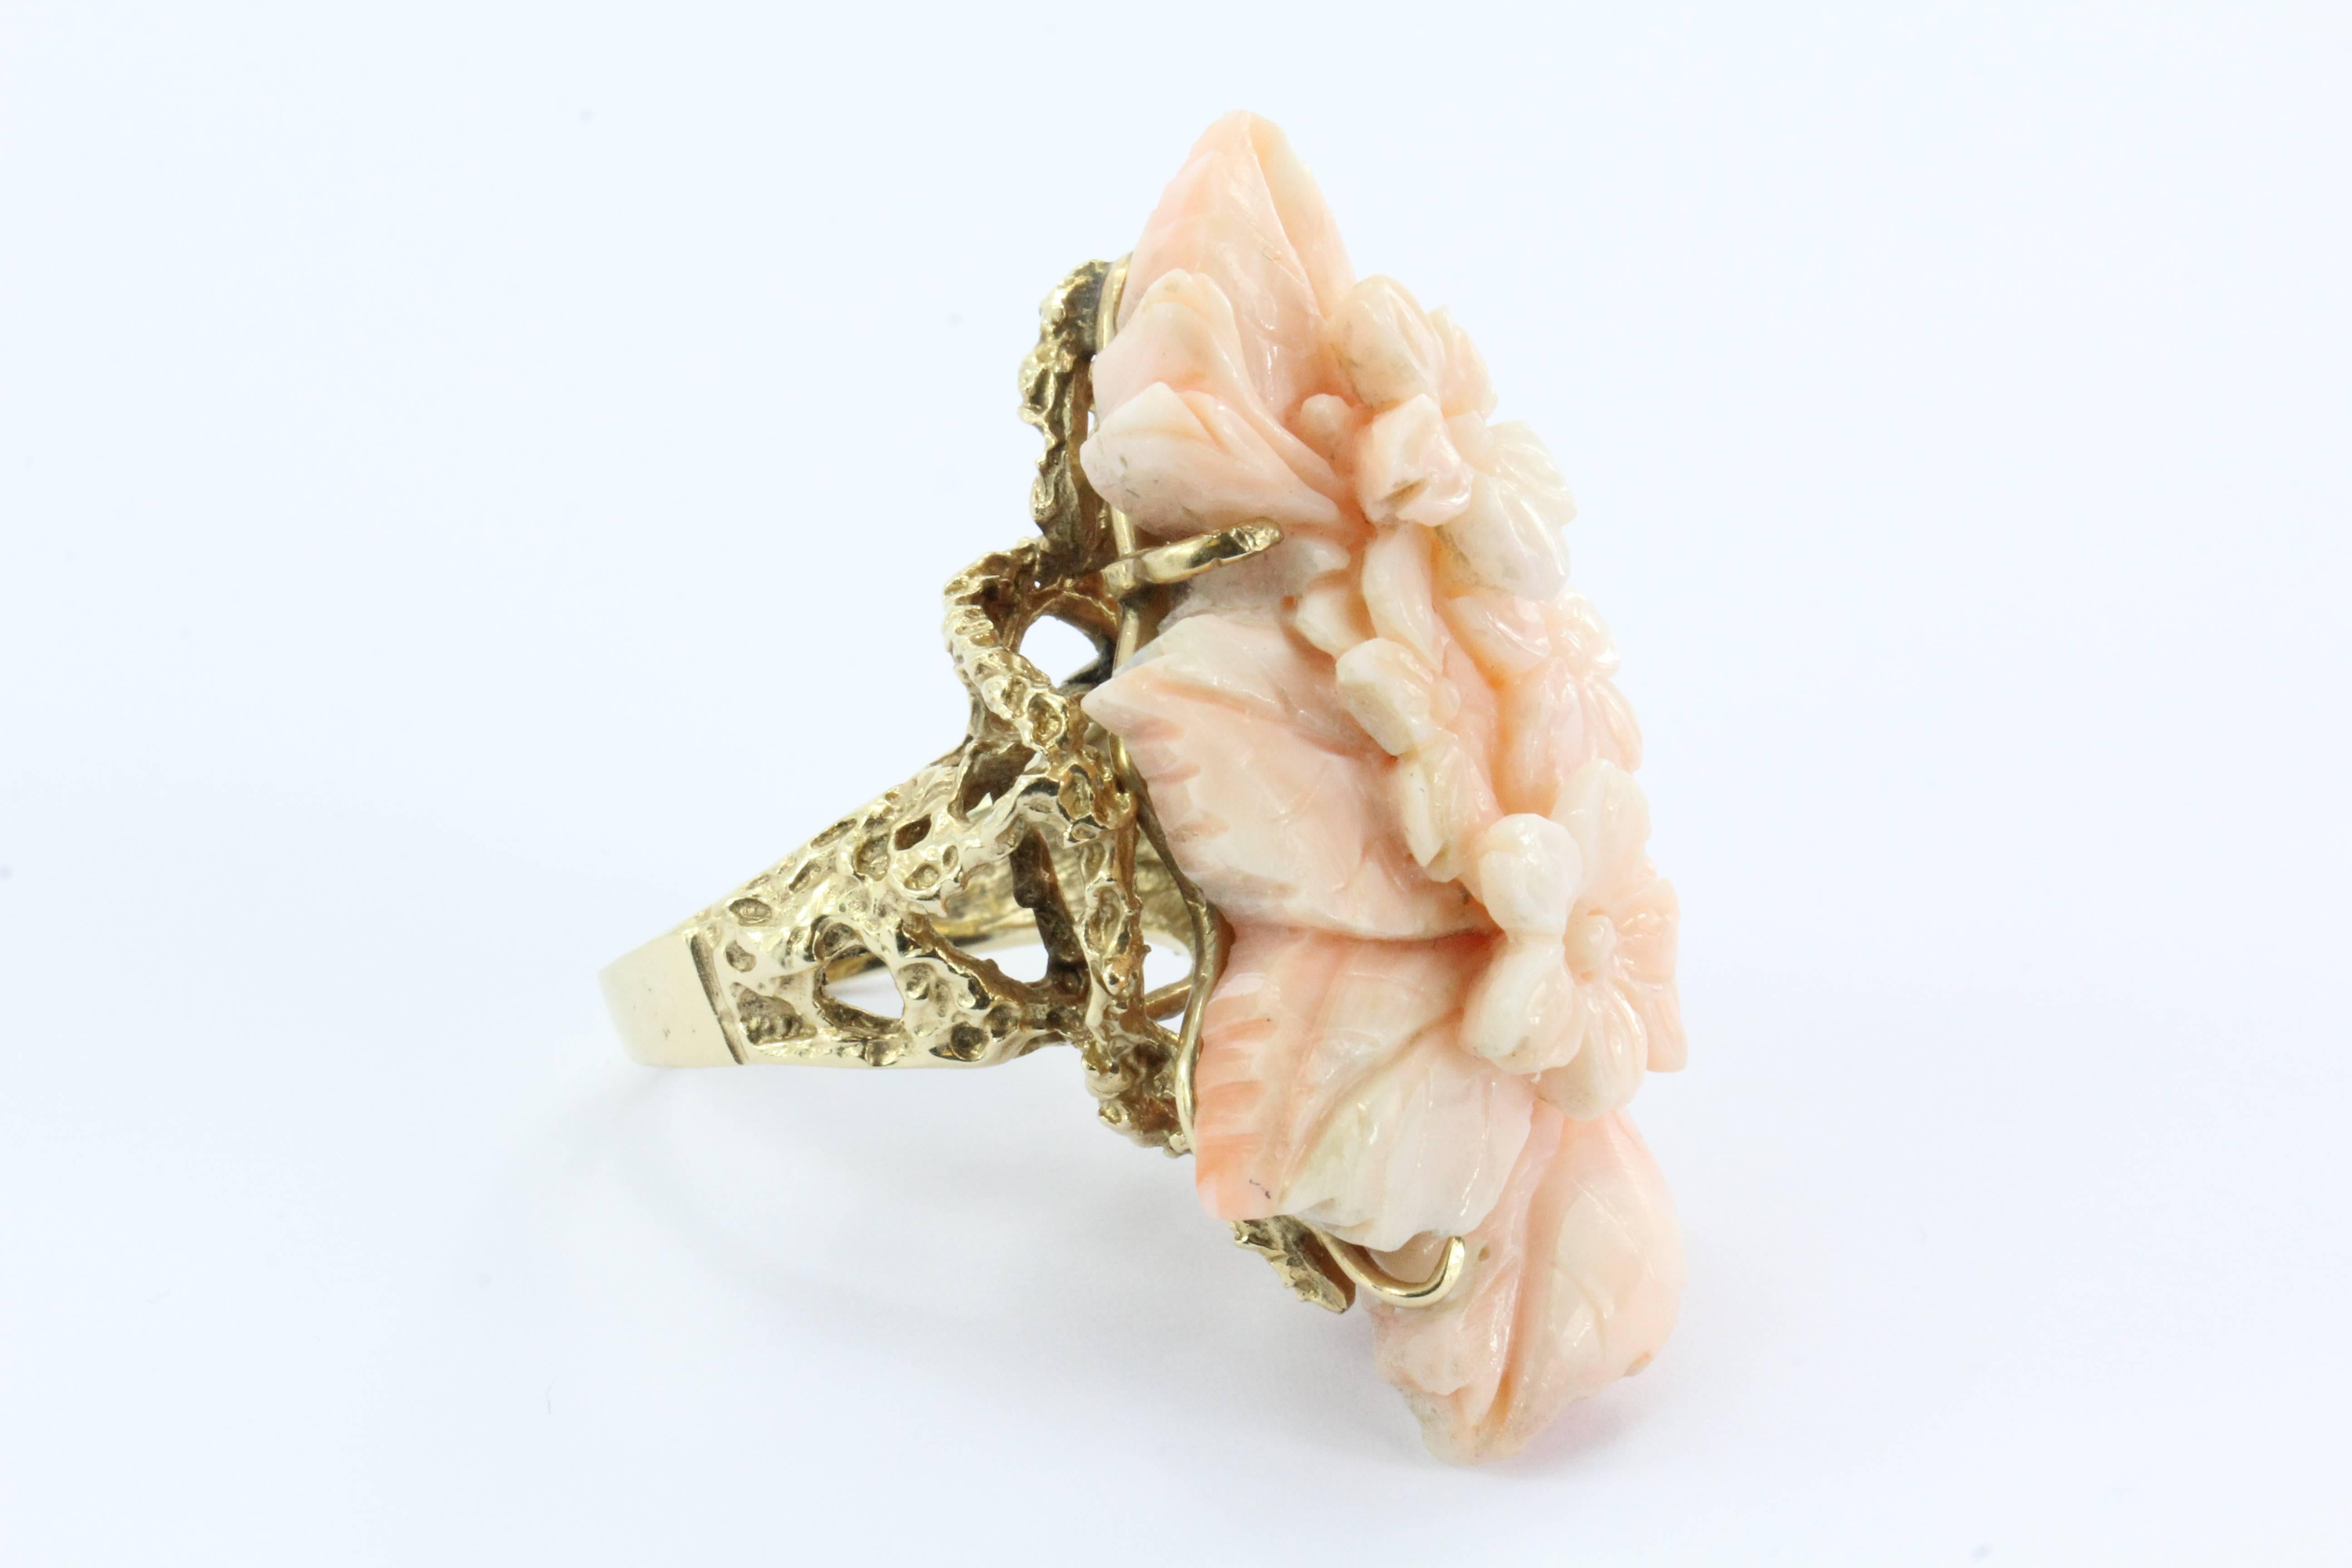 14K Gold Chunky Angel Skin Coral Carved Cherry Blossom Cocktail Ring. The ring is in great vintage estate condition and ready to wear.  The ring is hallmarked 14K on the inside.

The coral measures 1.9